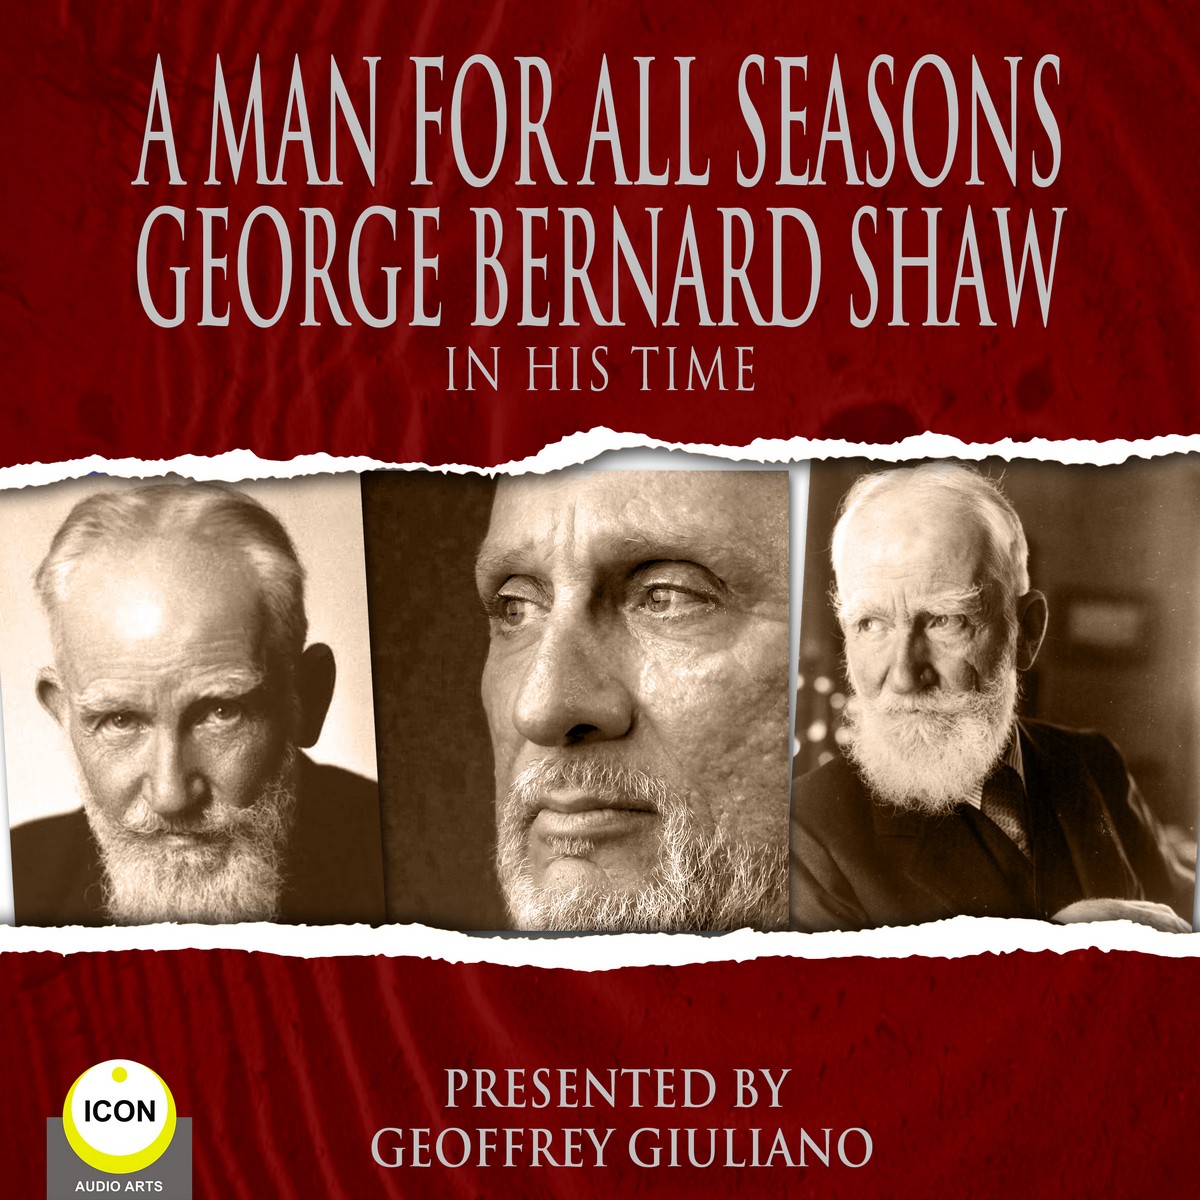 A Man For All Seasons – George Bernard Shaw In His Time